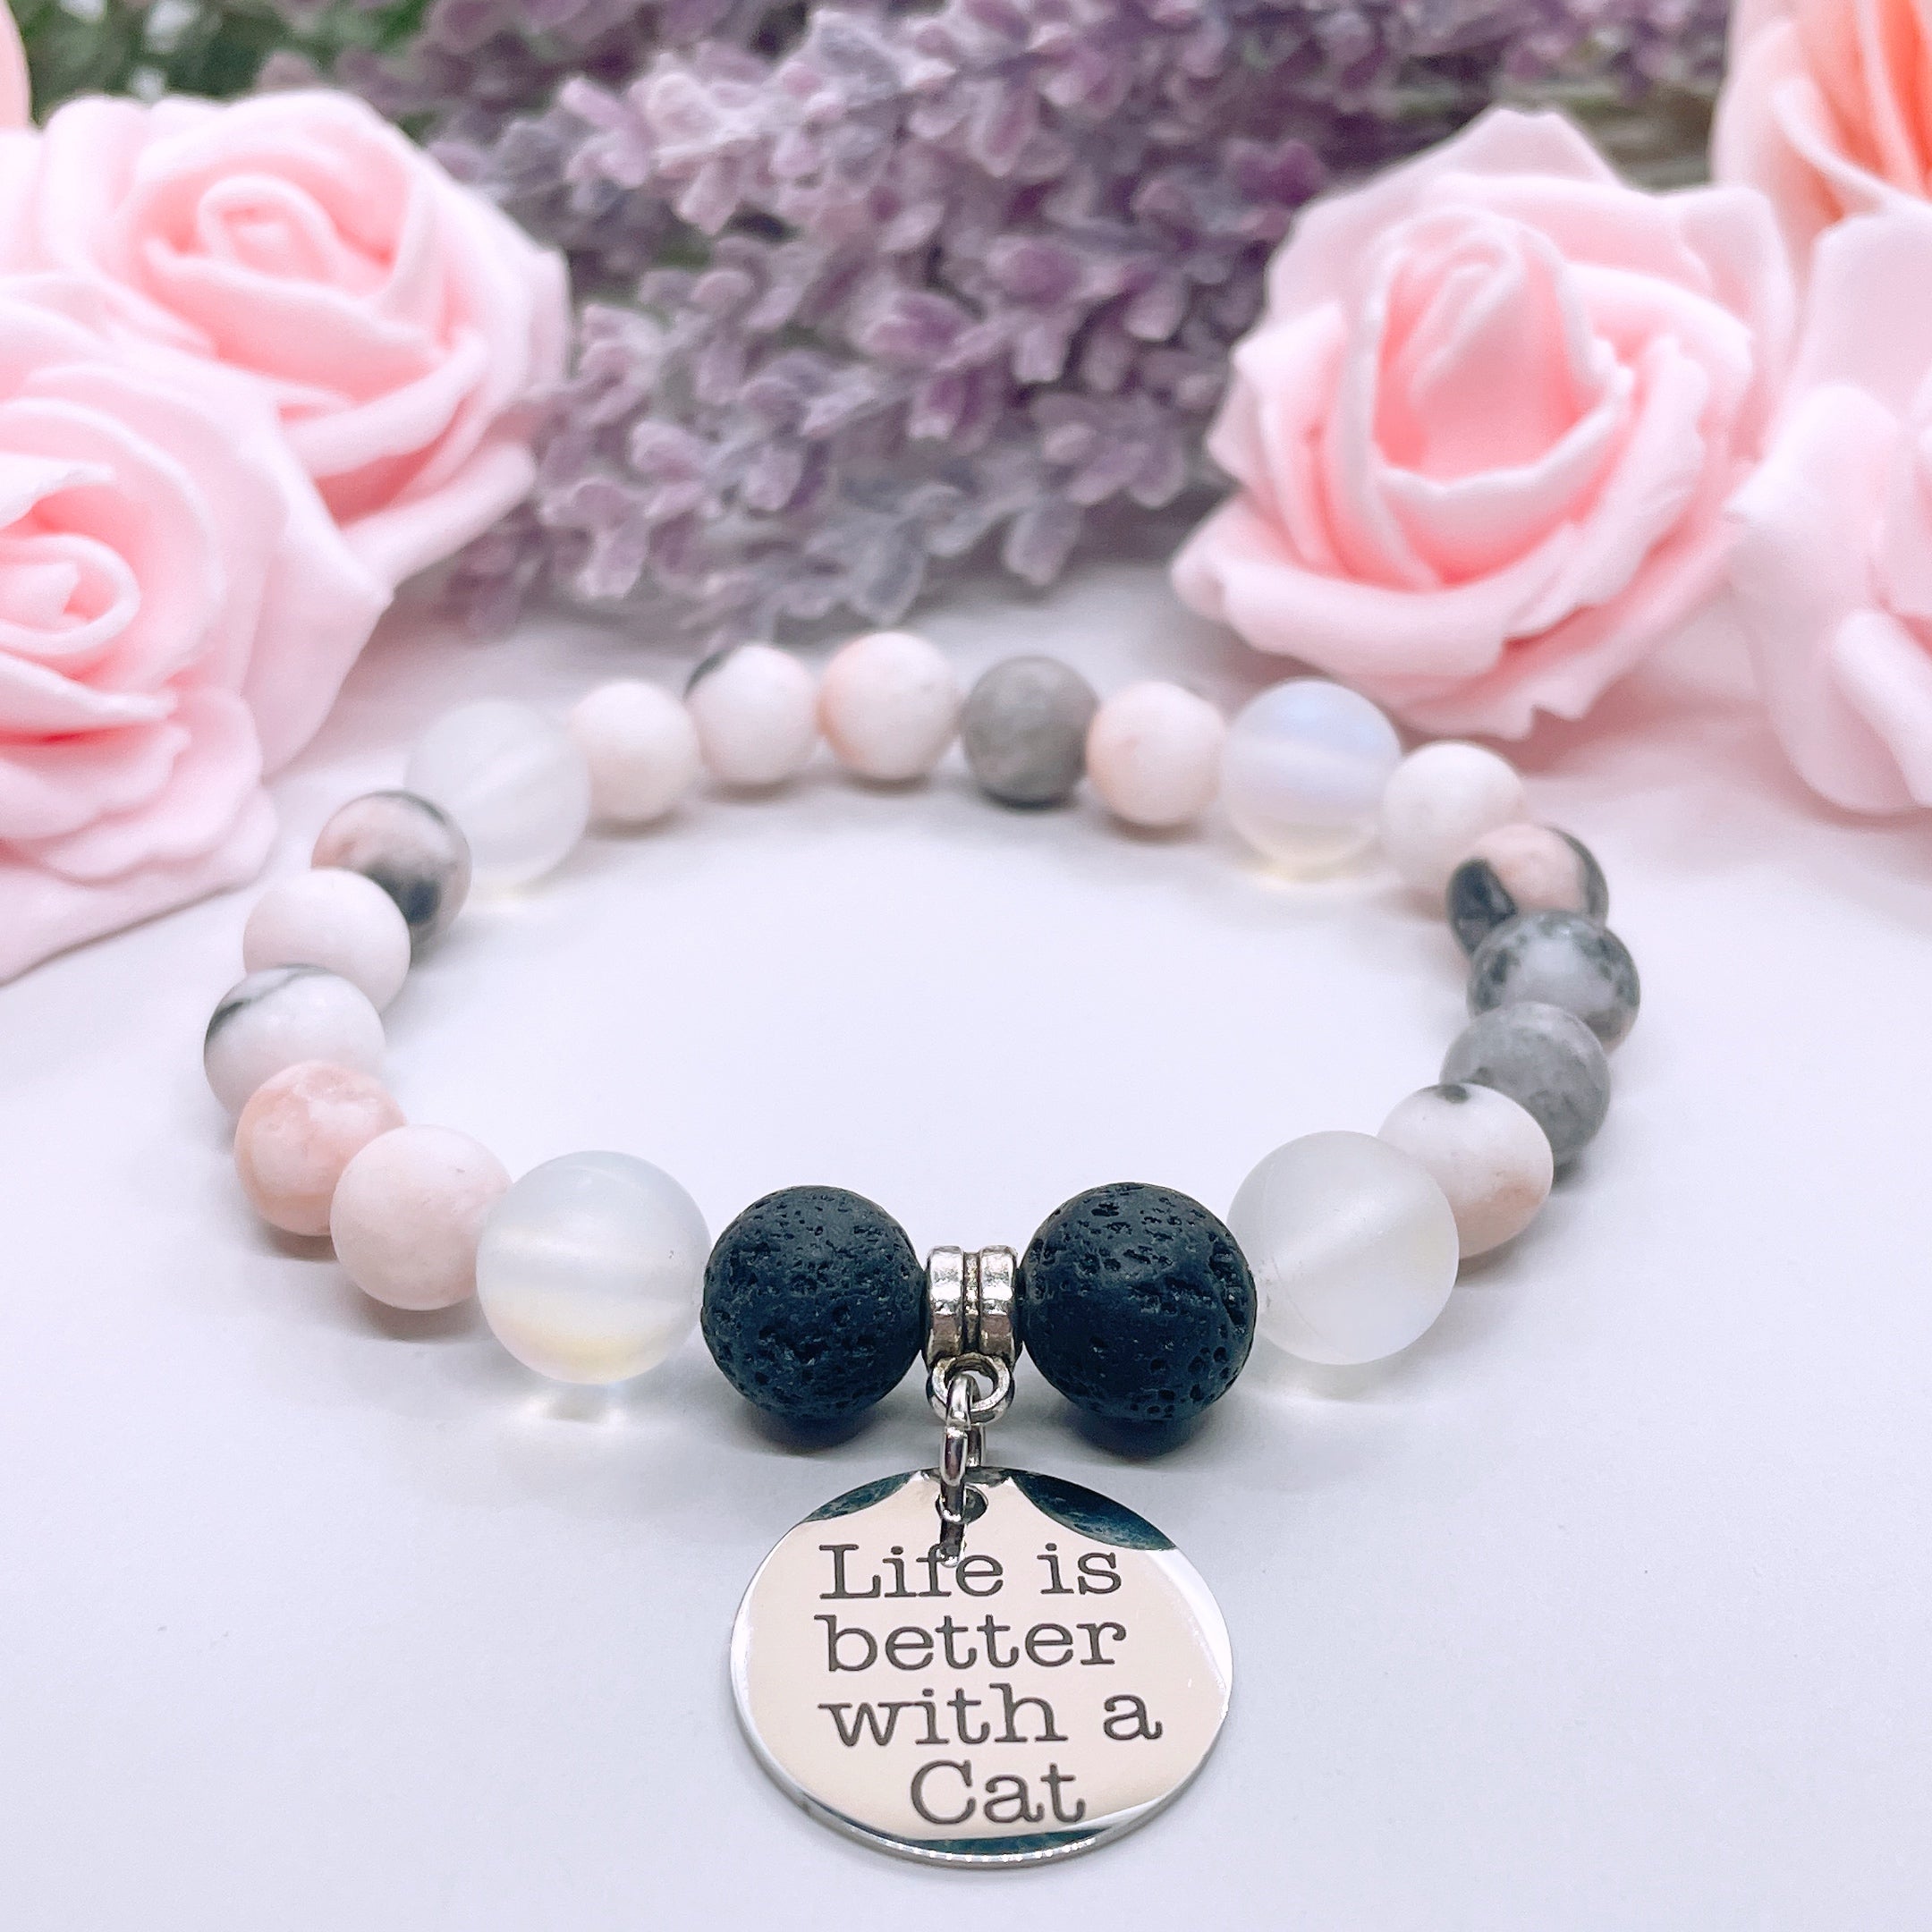 Life is Better with a Cat Charm Bracelet Lava